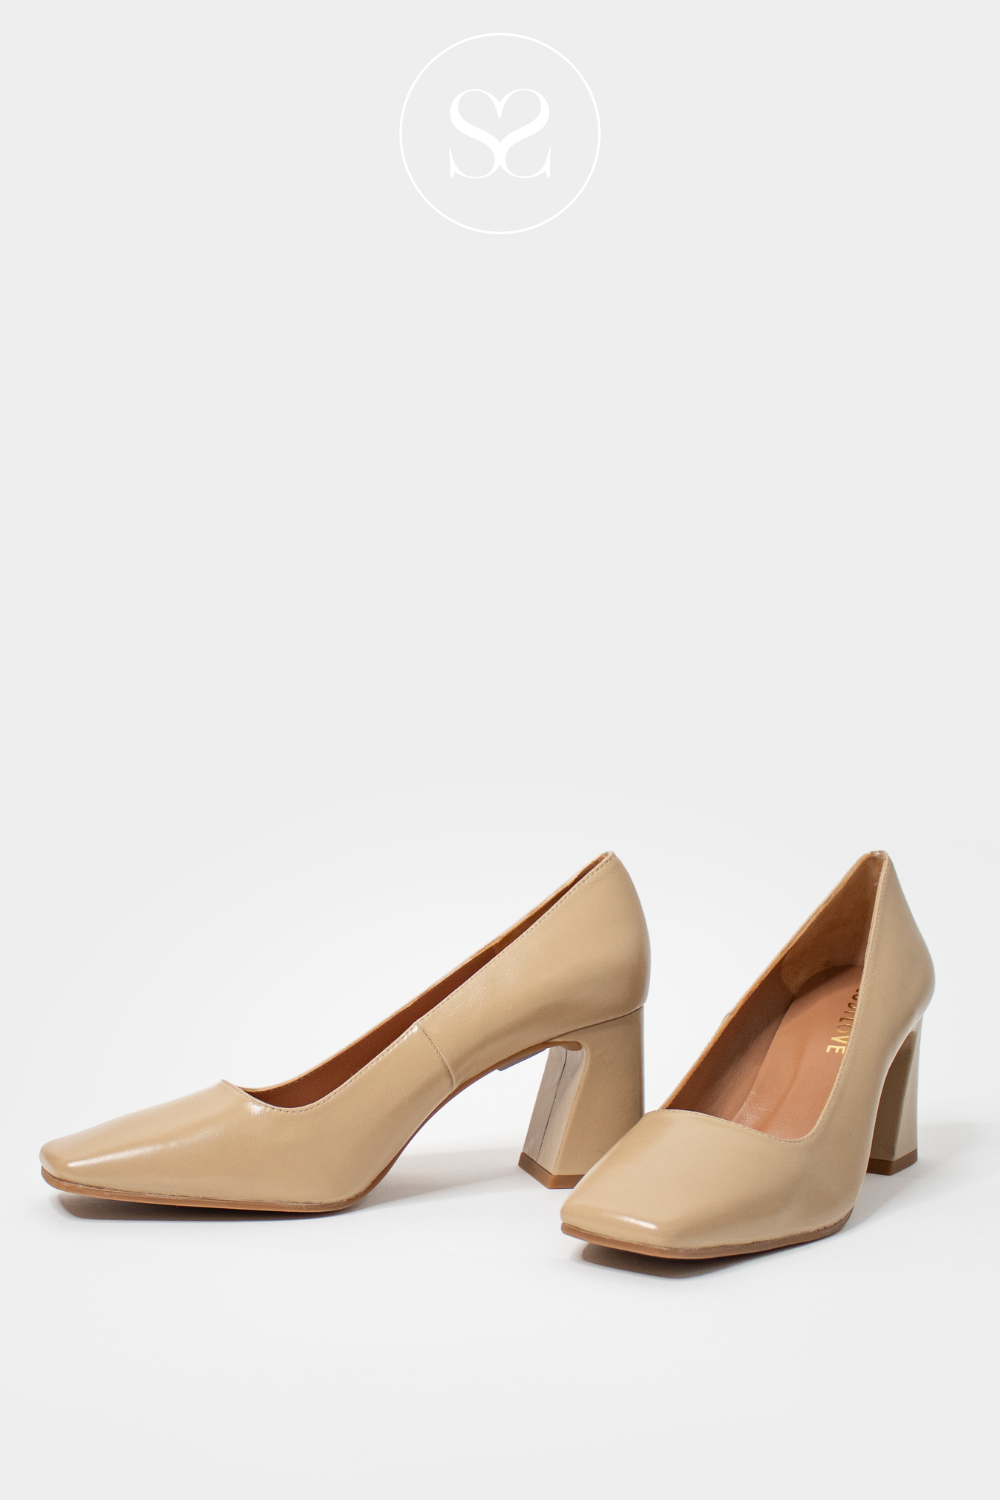 BLOCK HEEL CAMEL PUMPS WITH SQUARE TOE